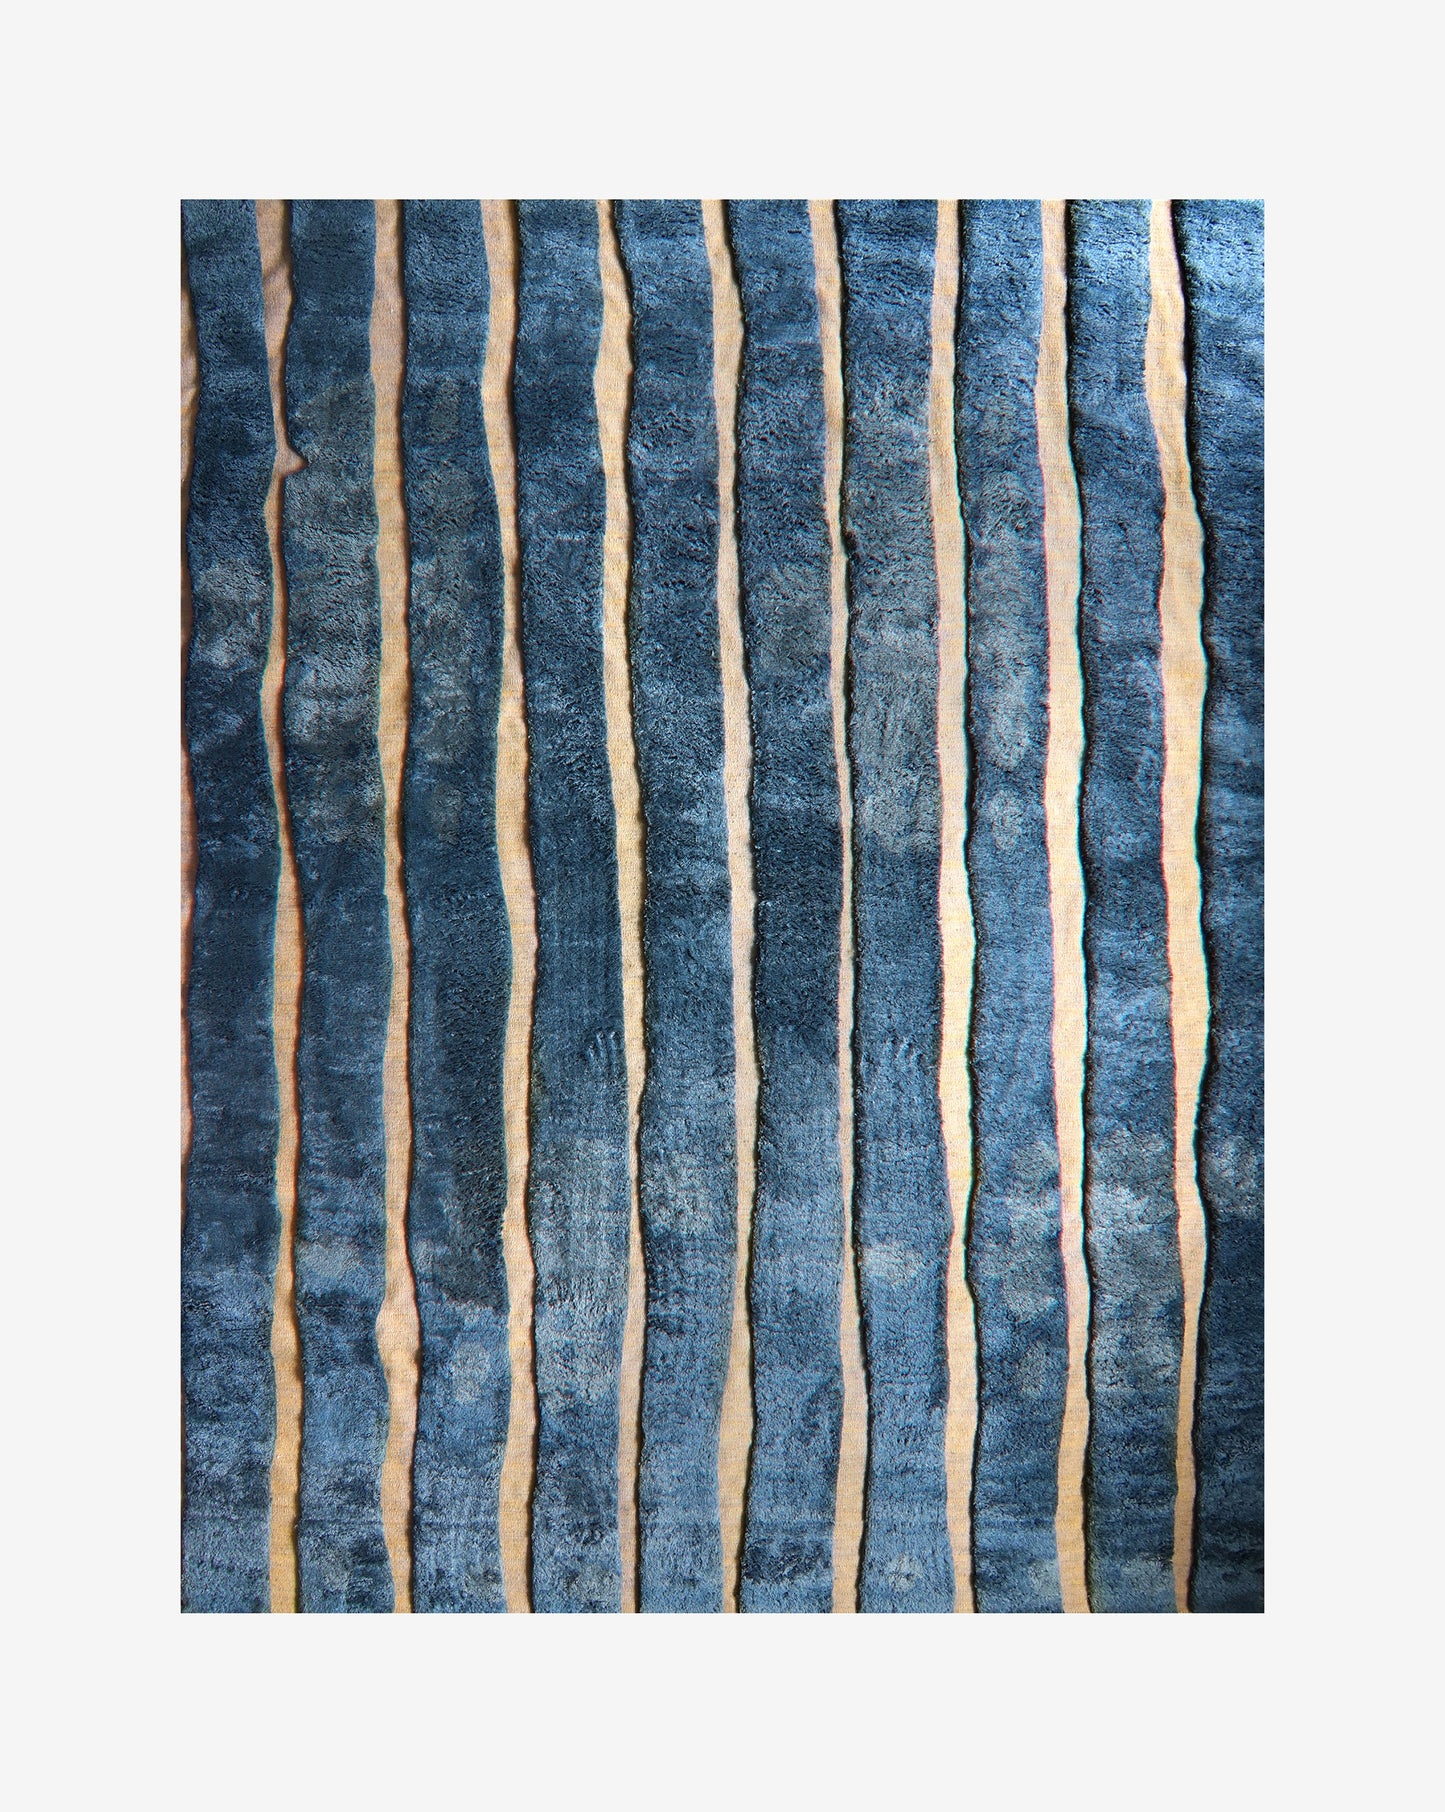 A Bold Stripe Hand Knotted Rug Thalassa, created using hybrid weaving techniques